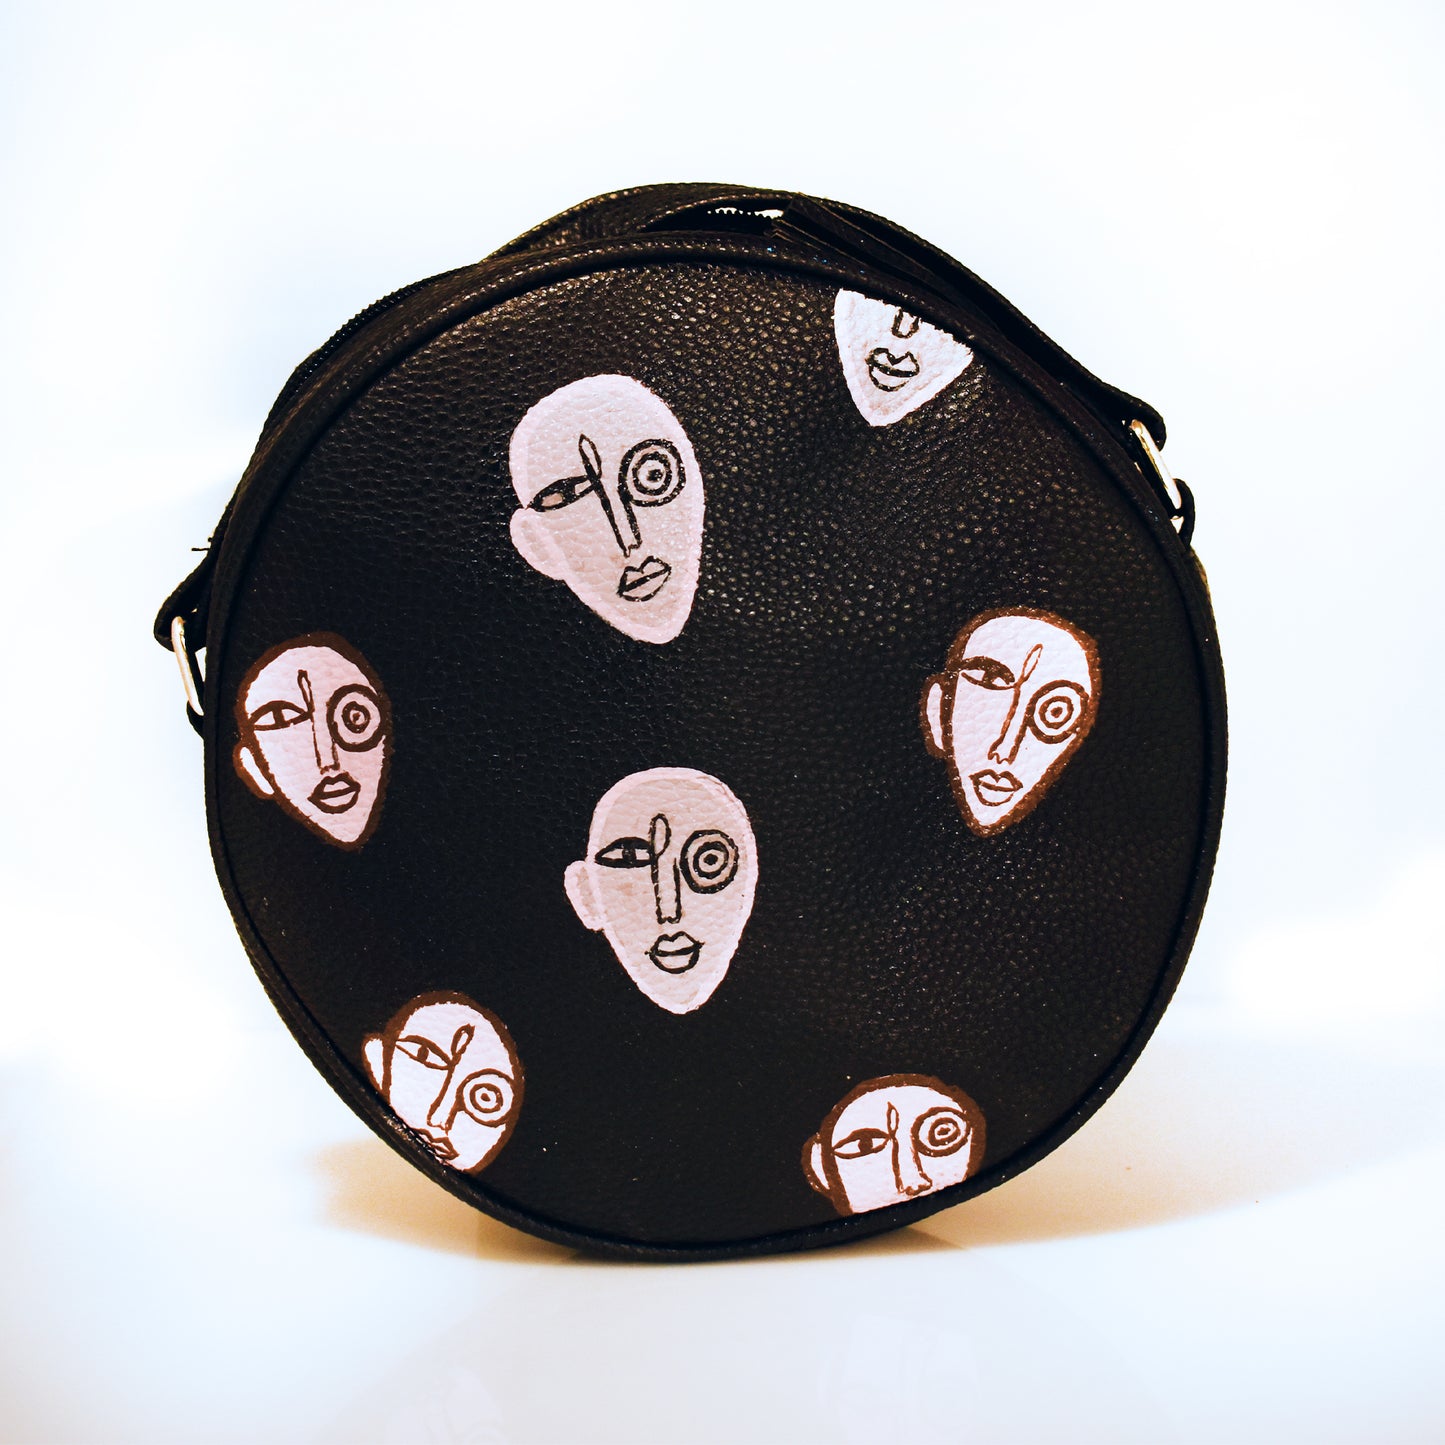 Face It - Black Mix NO.6 DSW - Circle Bag - Hand Painted by Temporarily Not Famous